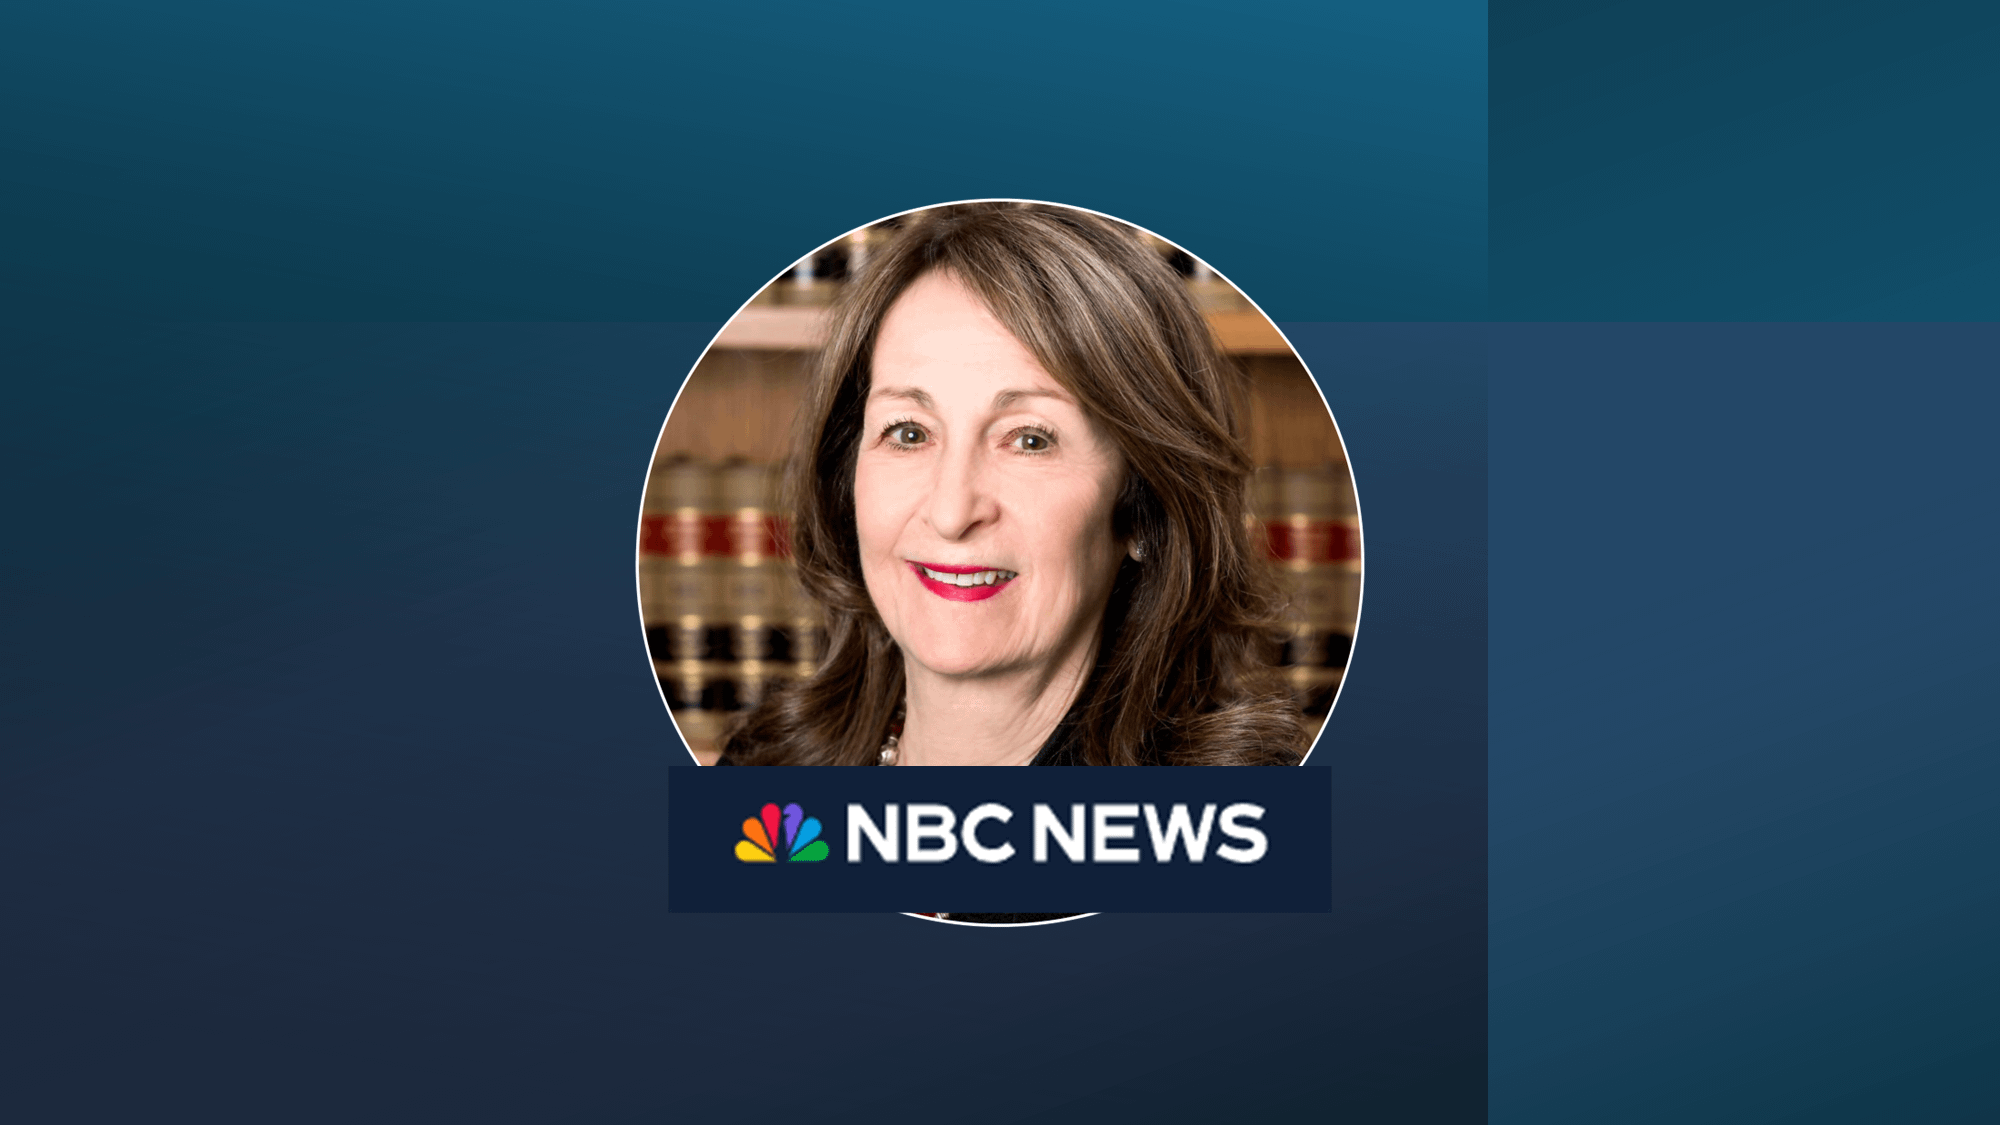 Carolyn Reinach Wolf Discusses Michigan School Shooter Case on NBC News Thumbnail